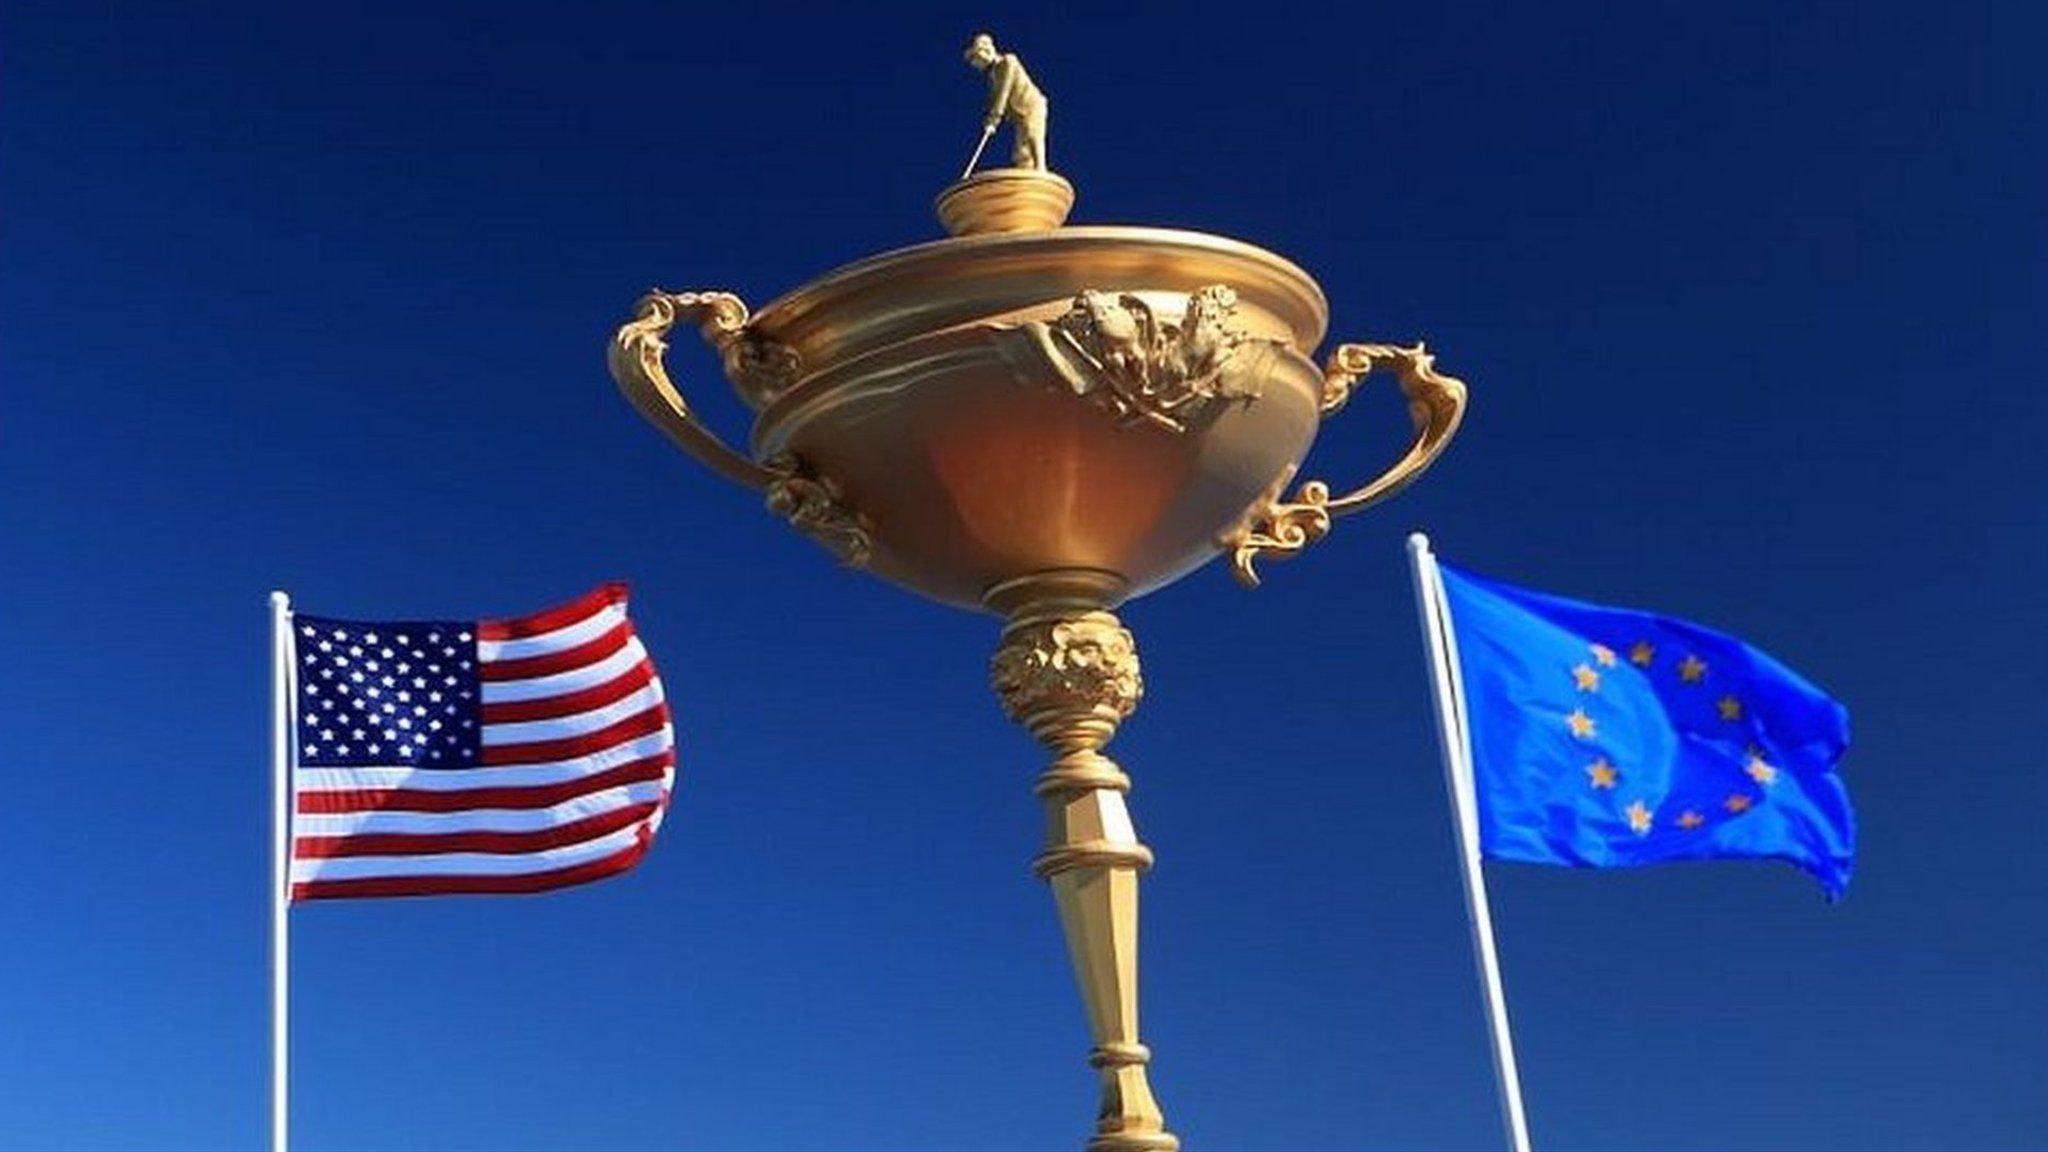 A giant Ryder Cup between the US and EU flags